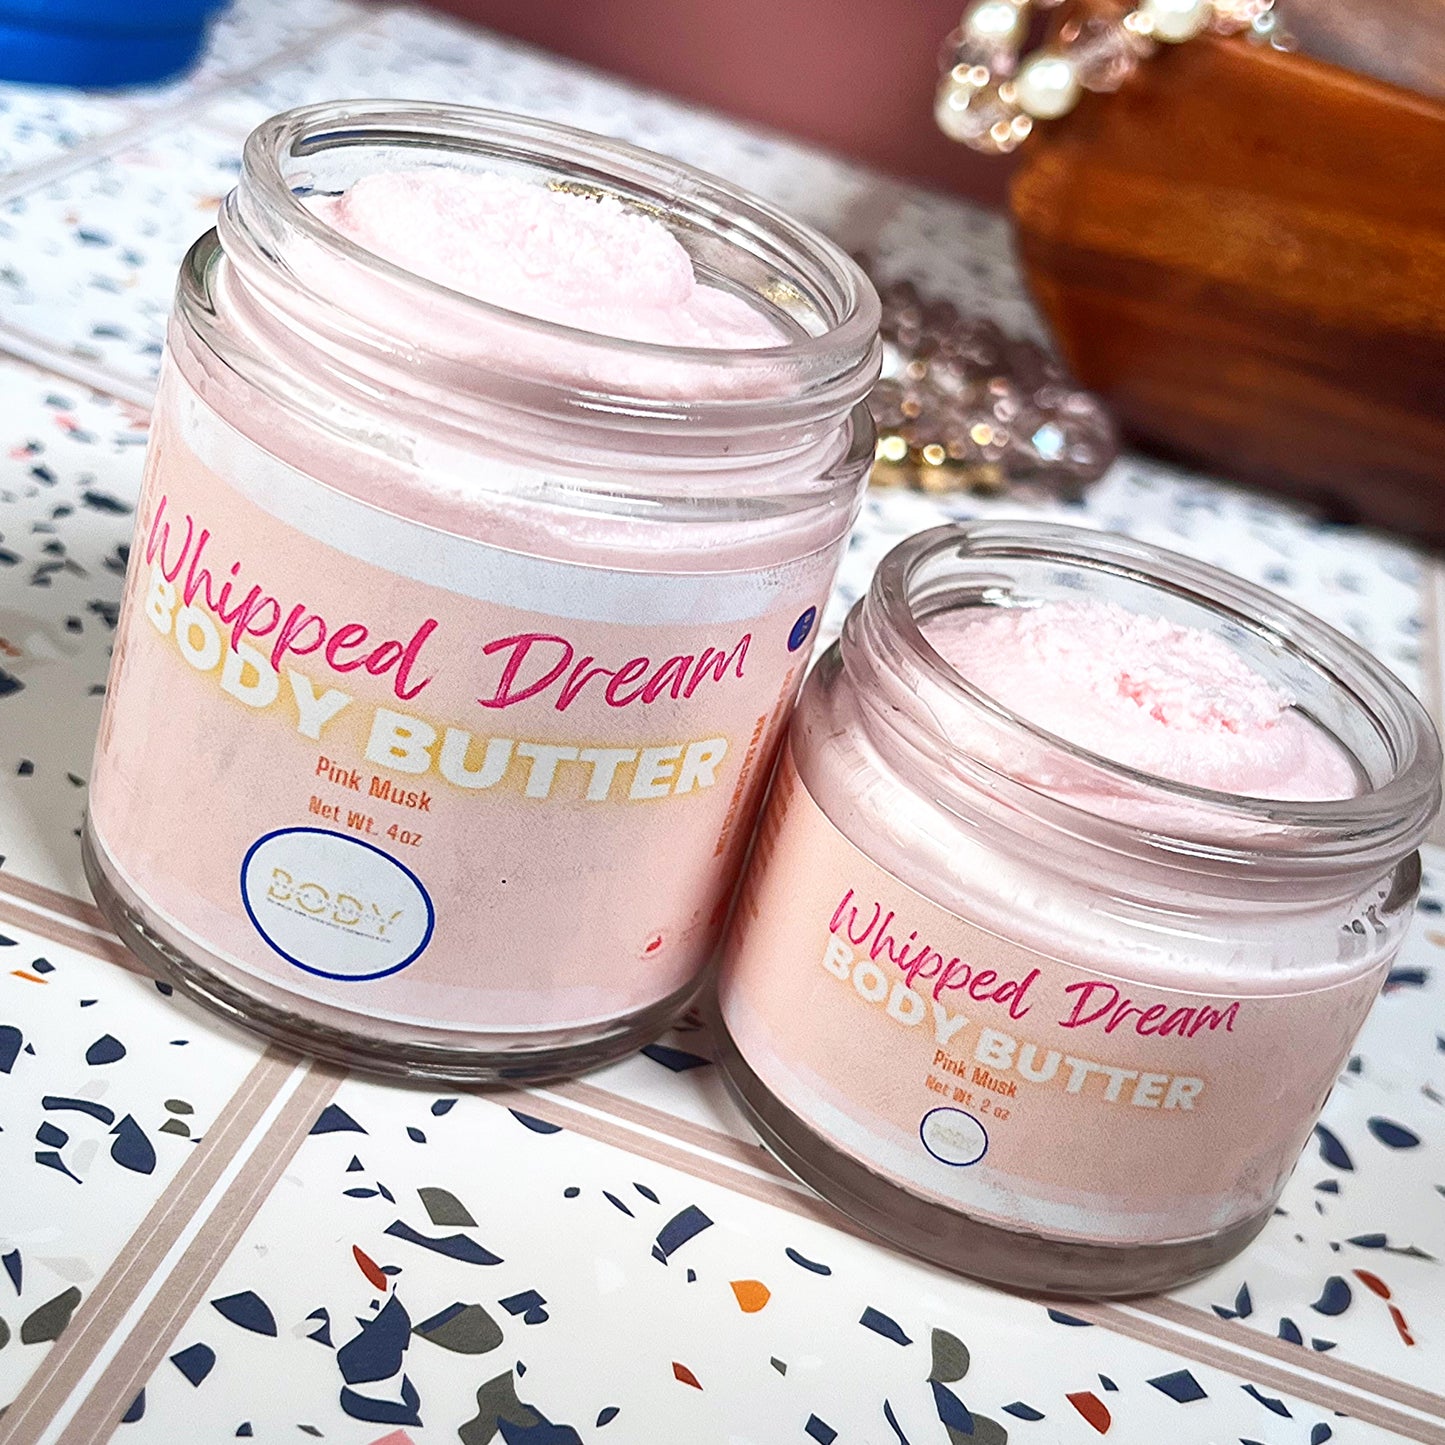 Whipped Body Butter "Pink Musk"